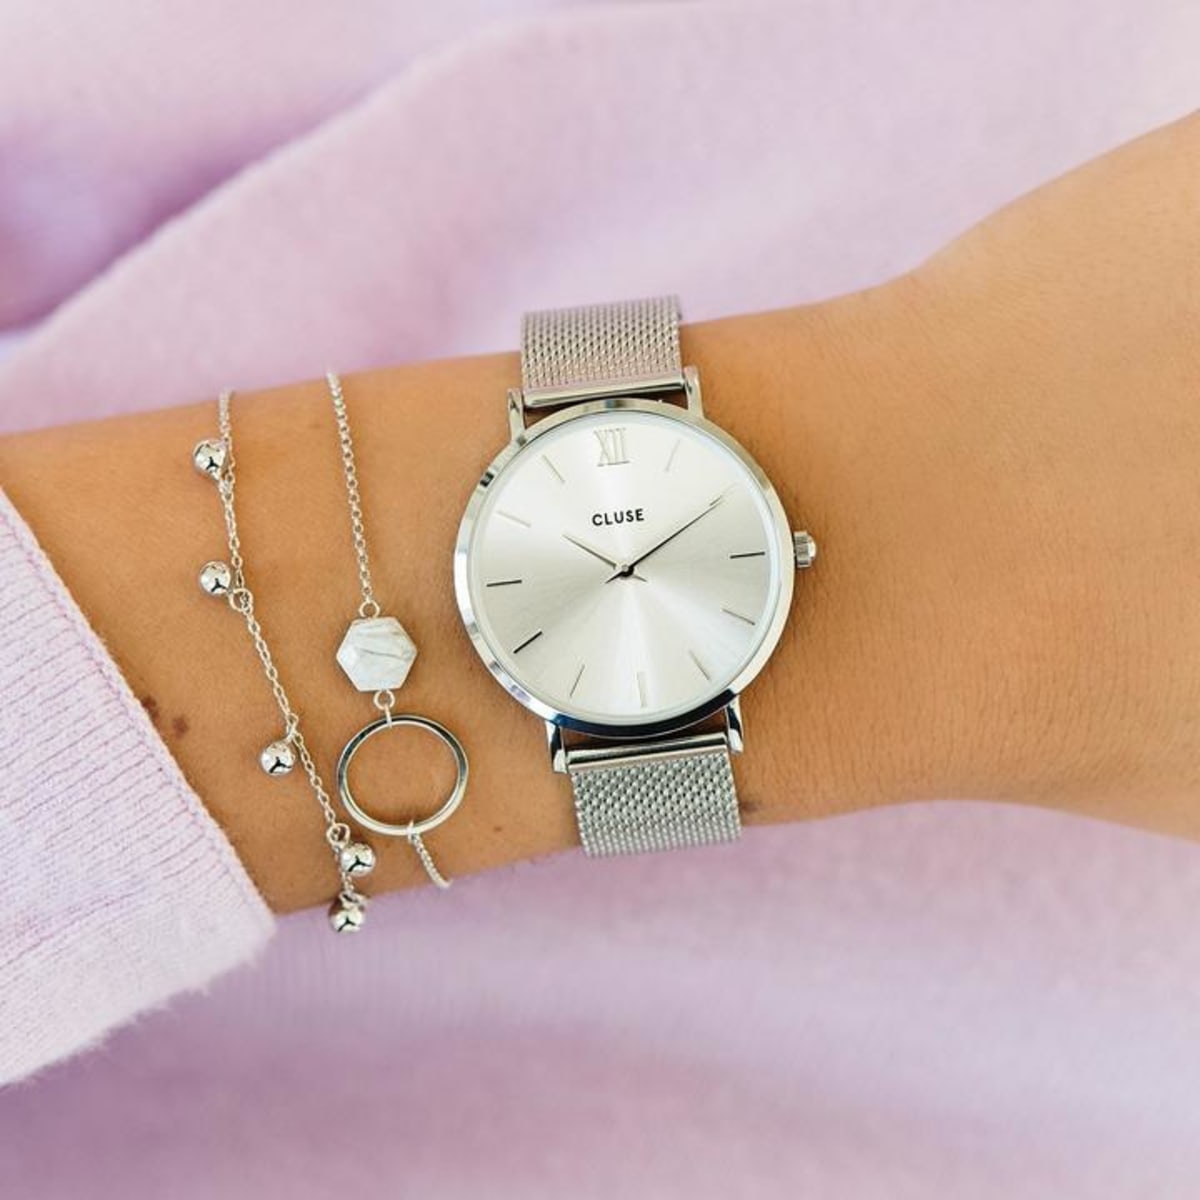 Our Minuit collection pays tribute to starry nights and elegant evening looks. The delicate design of this featherlight watch makes it the perfect accessory for a fashionable, yet subtle result. The watch features a 33 mm case, where silver is combined with a modern sunray dial and silver stainless steel mesh strap. The strap can be easily interchanged, allowing you to personalise your watch.